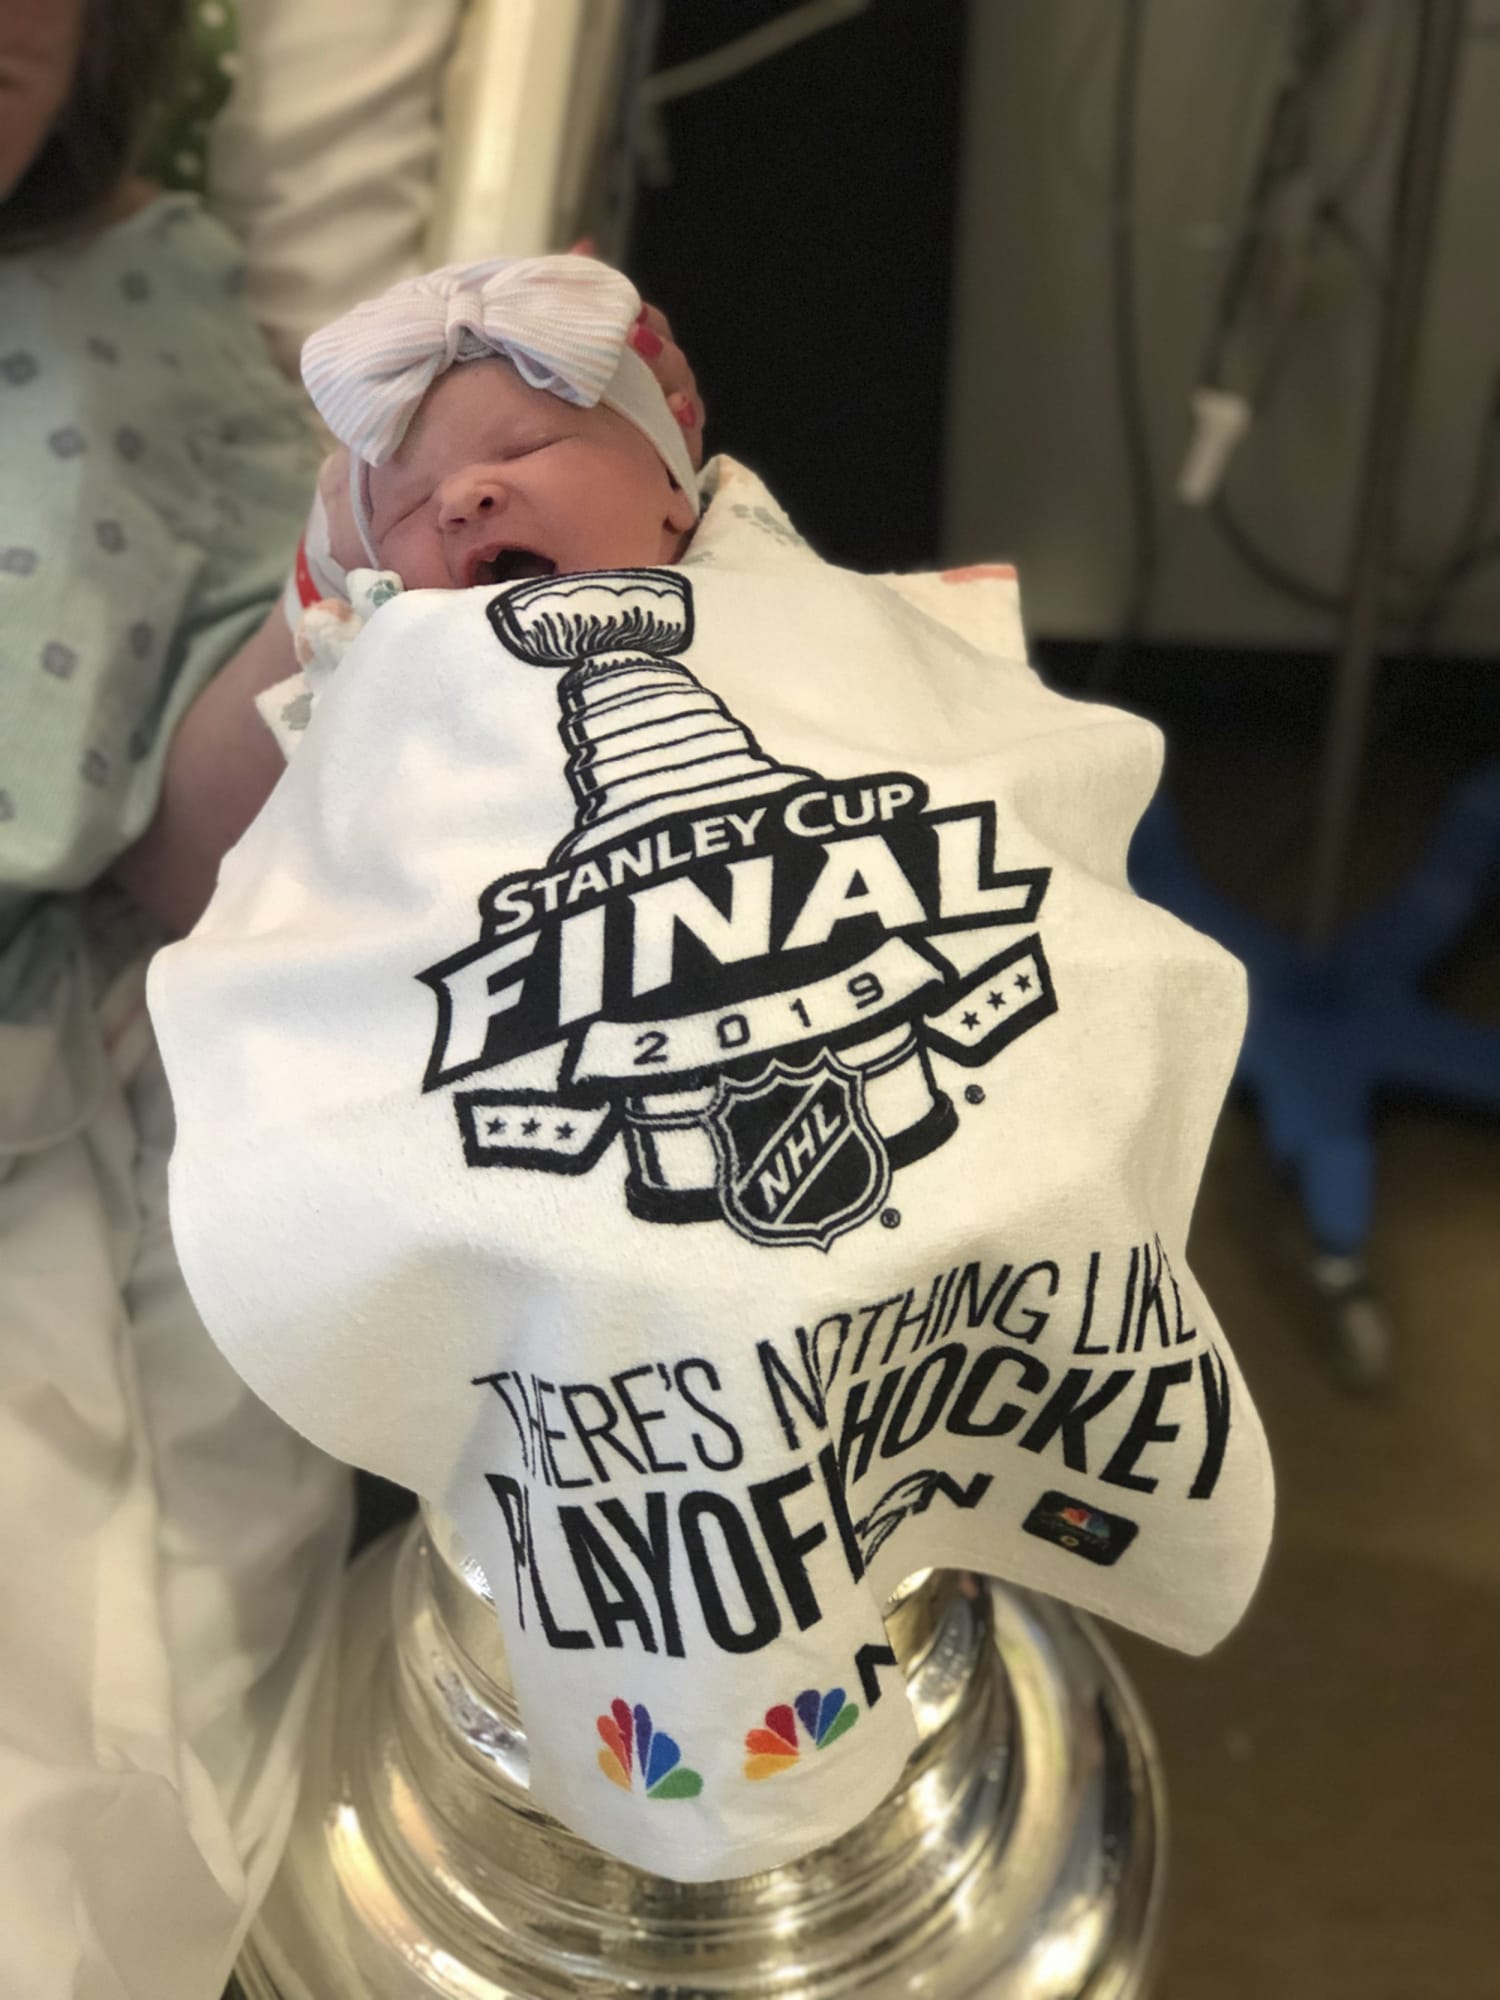 https://media-cldnry.s-nbcnews.com/image/upload/newscms/2019_23/1444675/youngest-baby-stanley-cup-trophy-today-inline-190605-002.jpg